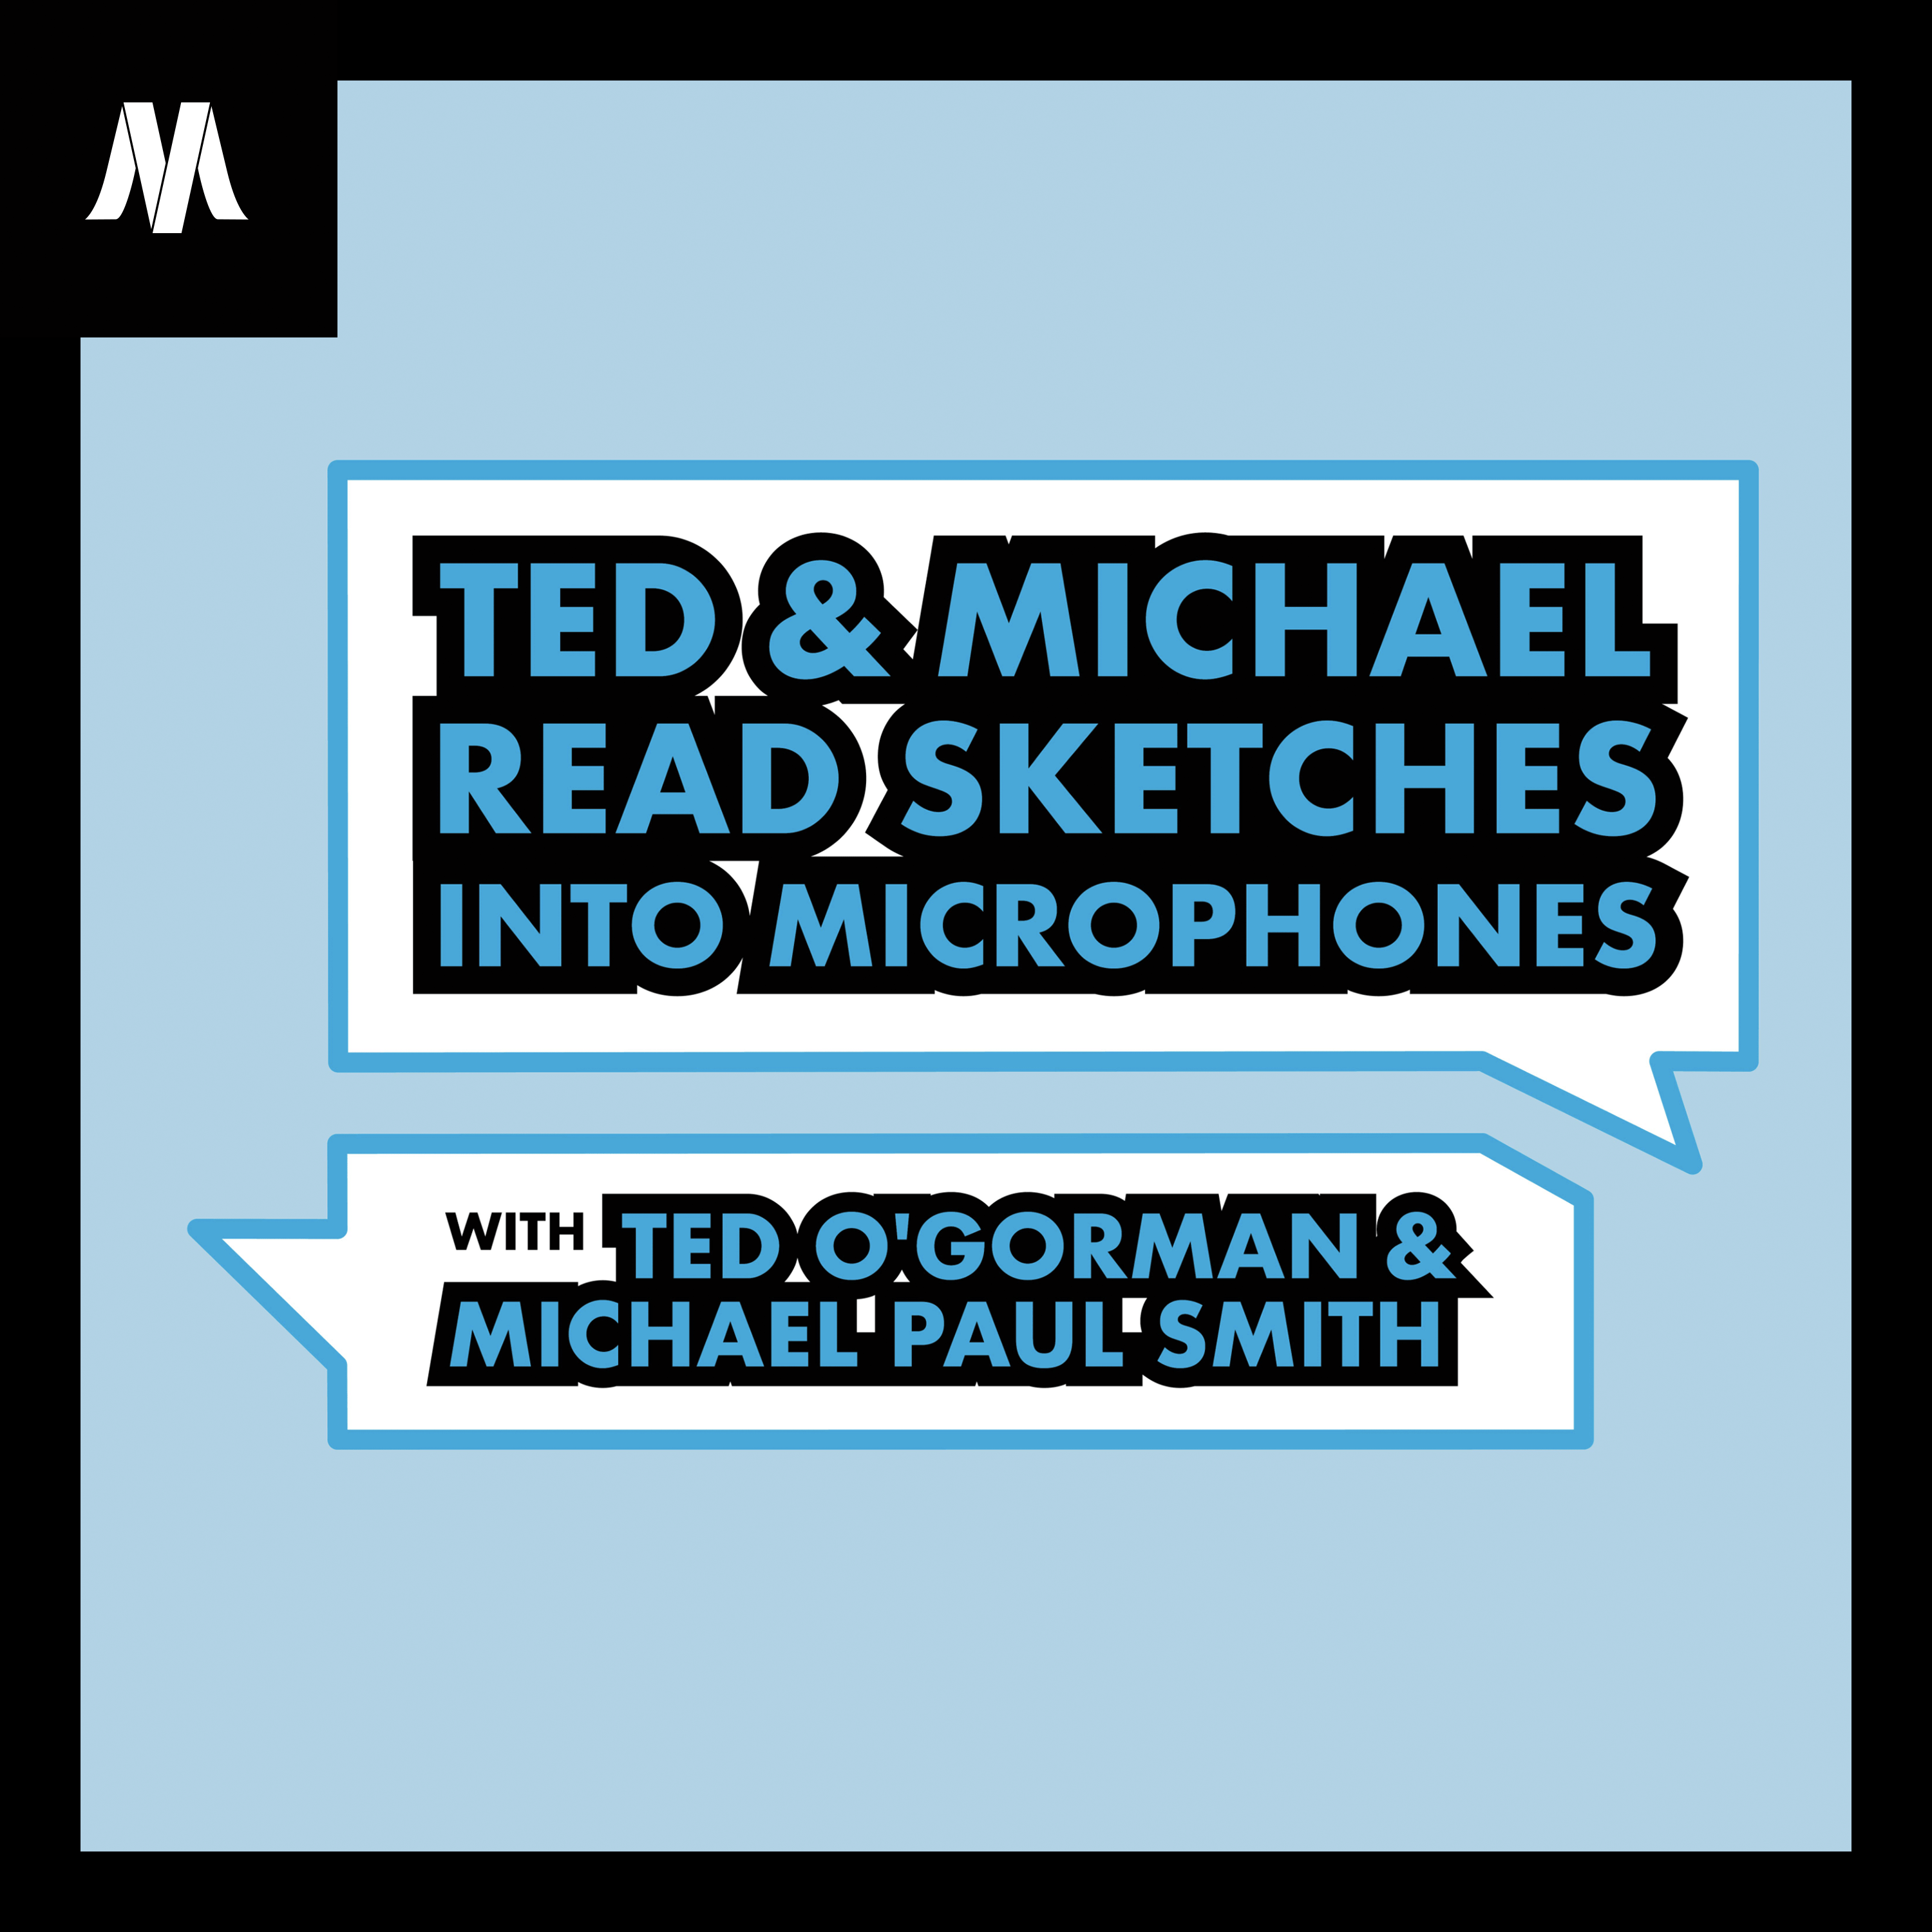 Ted & Michael Read Sketches Into Microphones Album Art